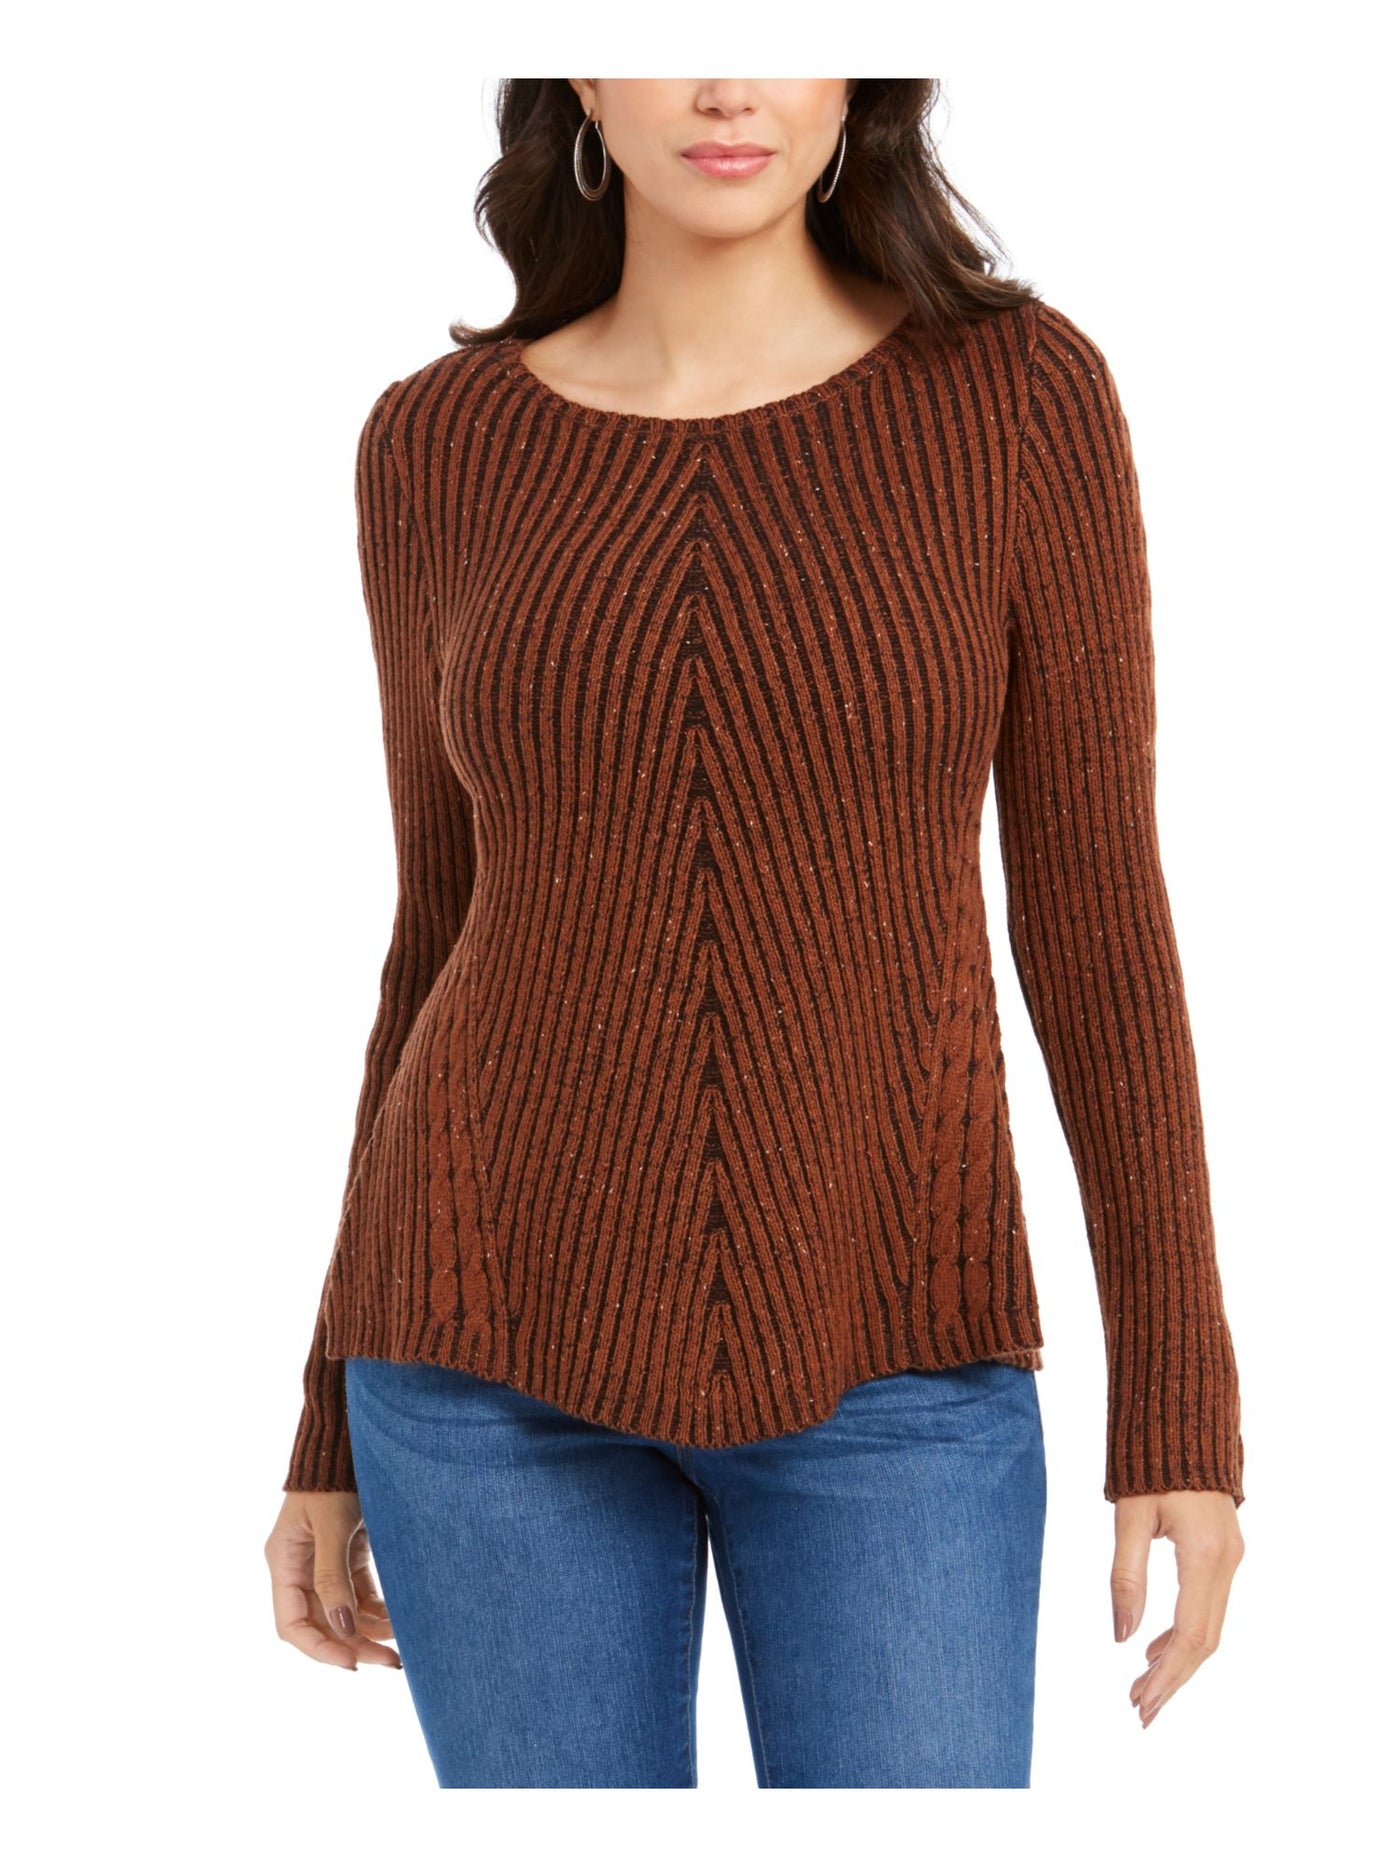 STYLE & COMPANY Womens Brown Textured Ribbed Speckle Long Sleeve Jewel Neck Sweater Petites PM